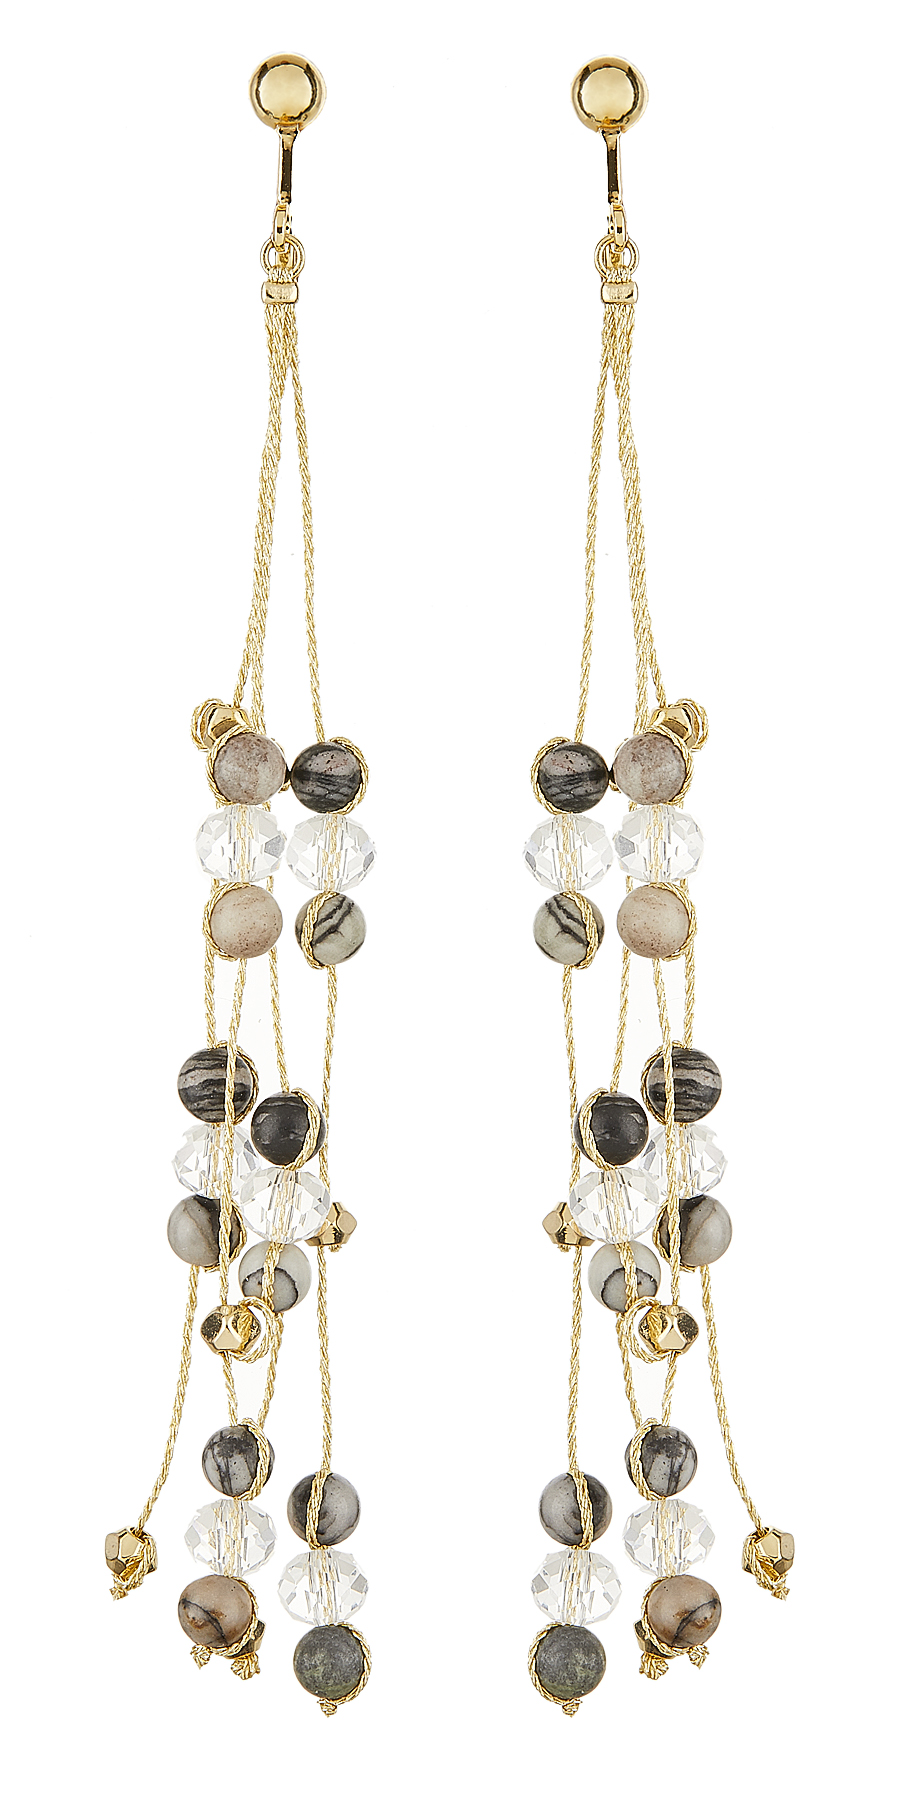 Clip On Earrings - Ryo B - gold drop earring with grey and black agate stone and glass beads